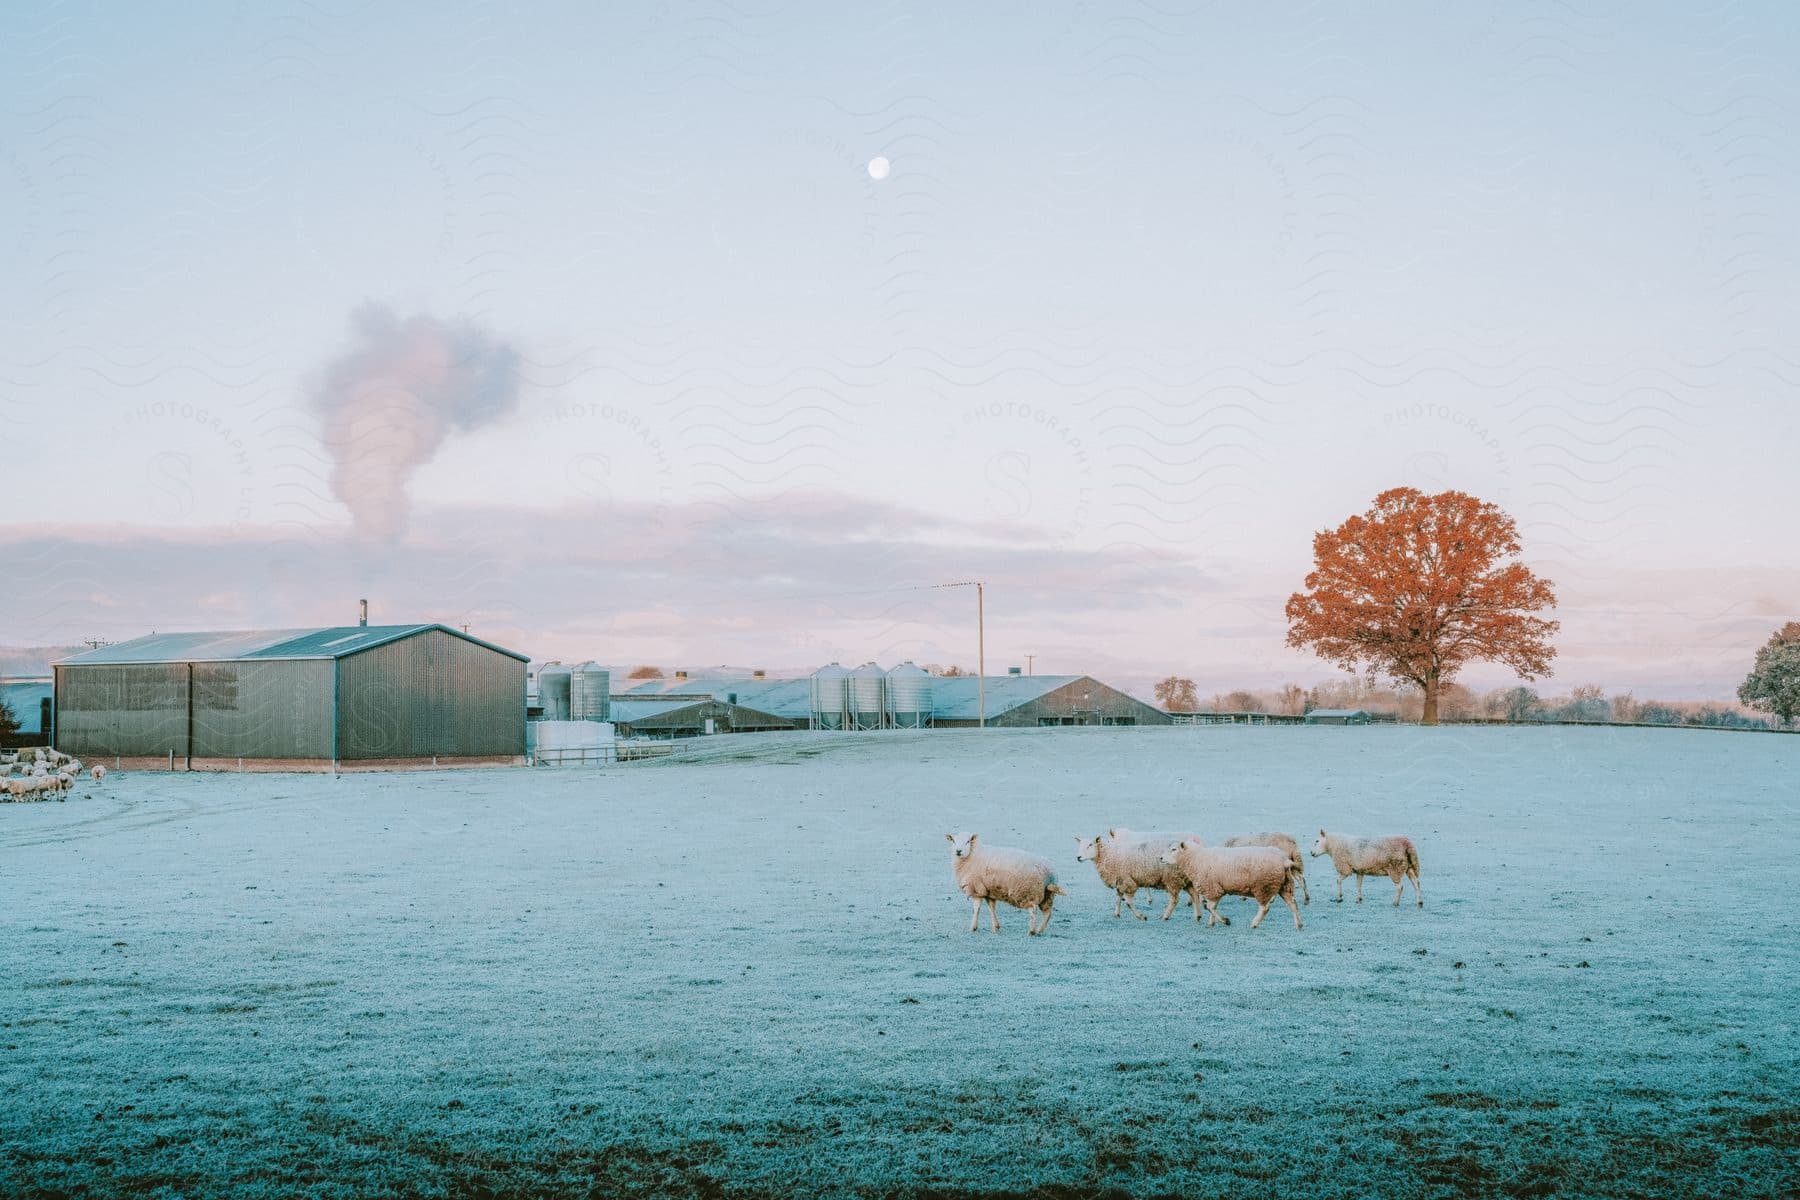 Sheep graze in the pasture near agricultural outbuildings.